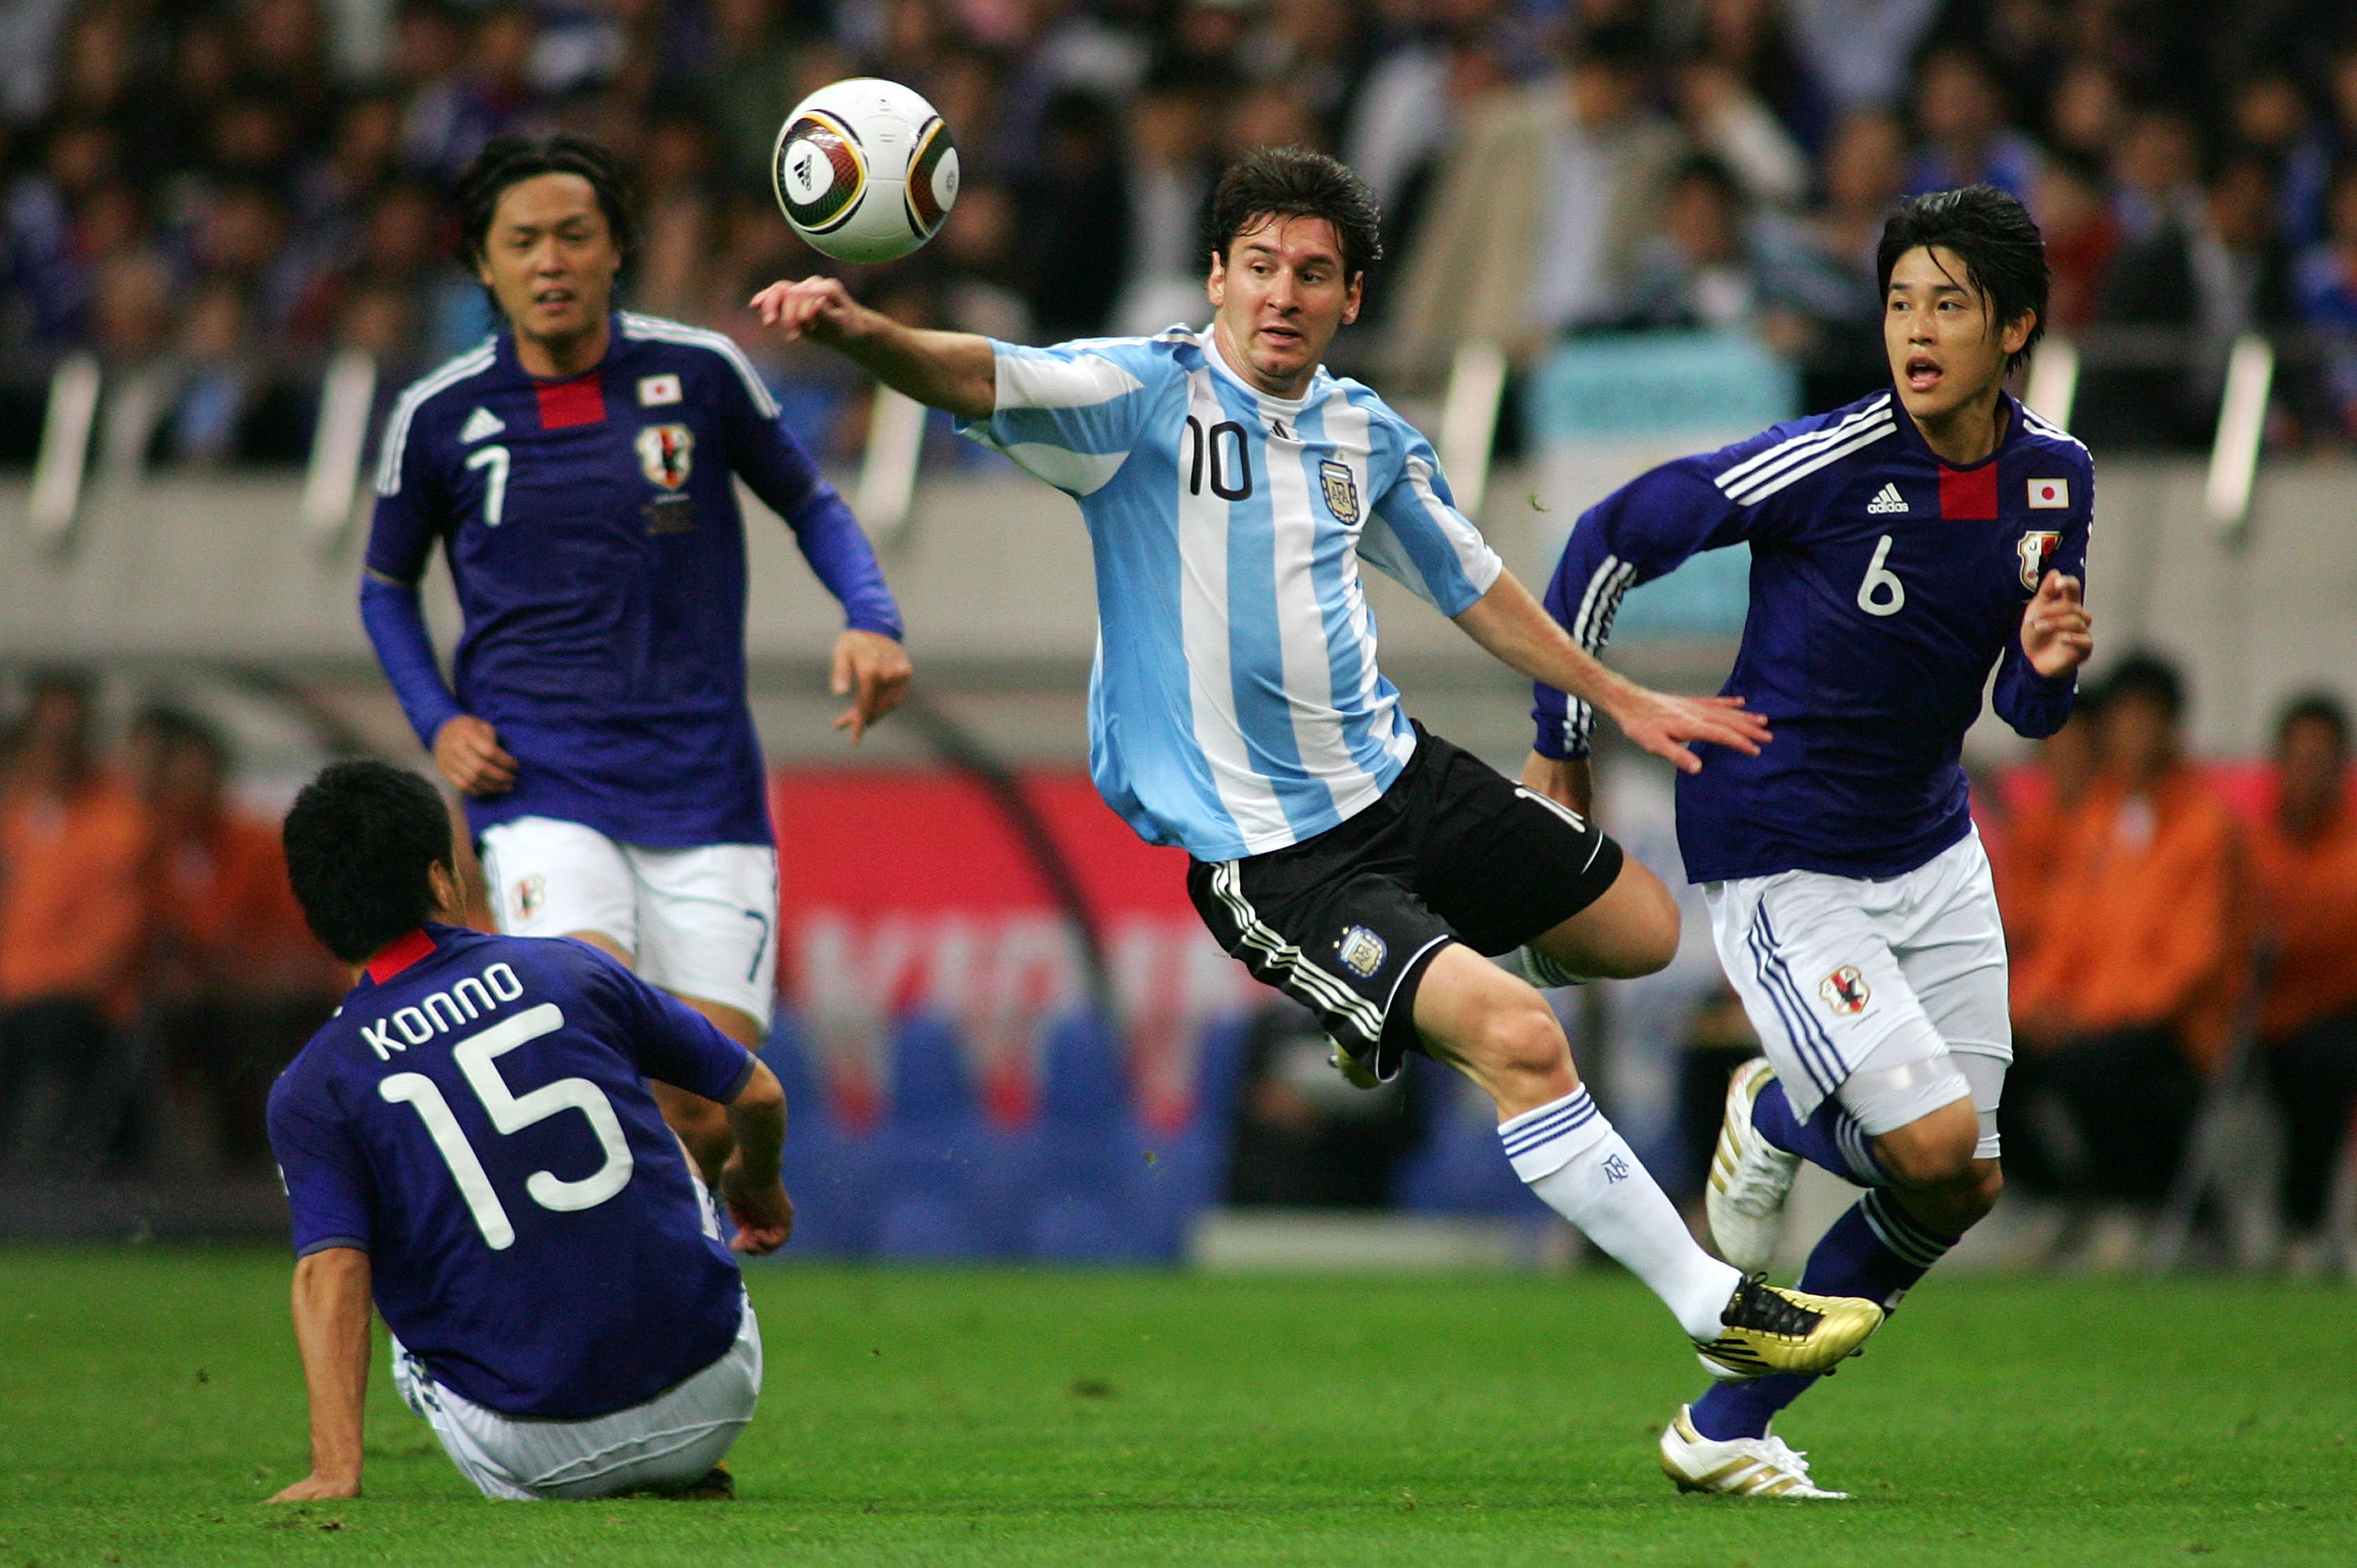 Will 2011 be the year Messi replicates his Barcelona form at the national team level